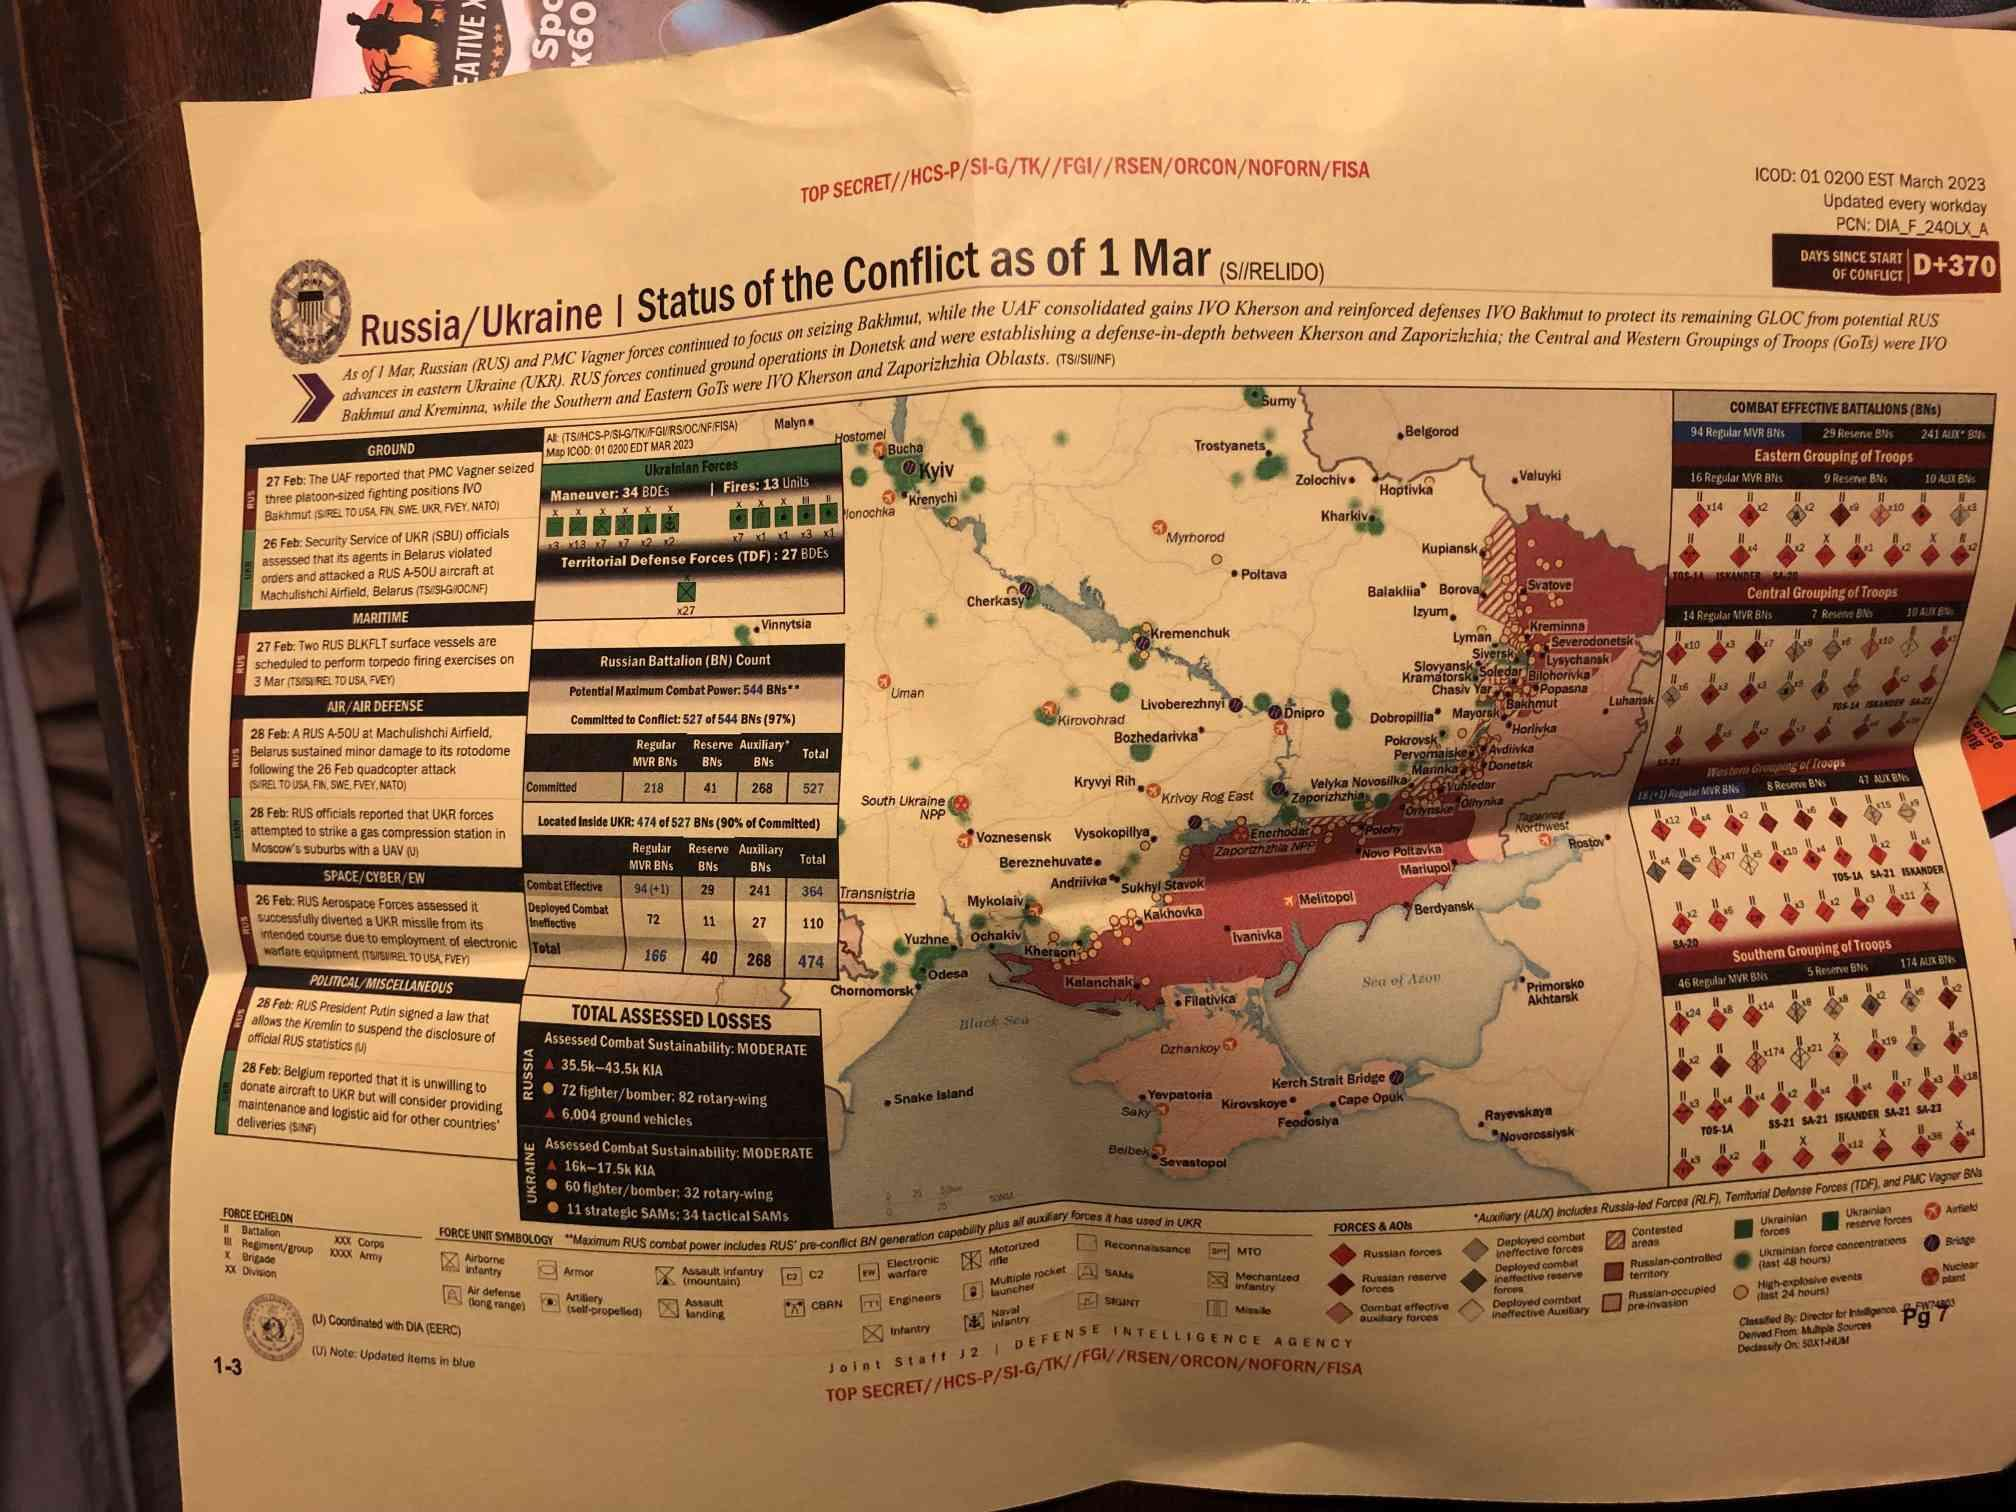 Status of the conflict as of the first of march from the Jack Teixeira documents